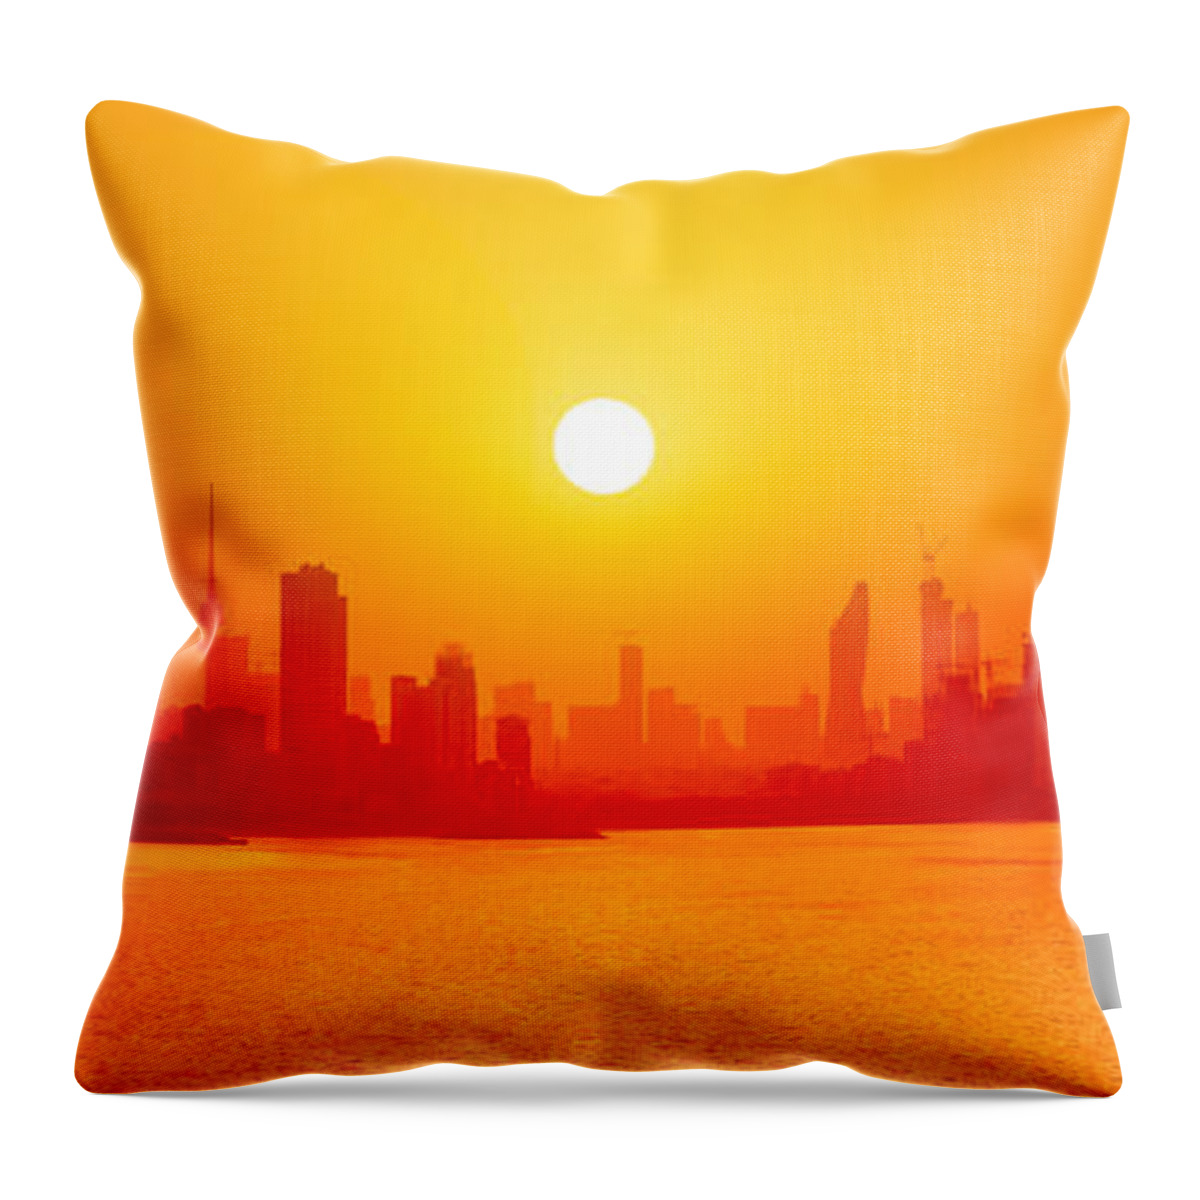 Kuwait Throw Pillow featuring the photograph Golden Shores Of Kuwait by Iryna Goodall